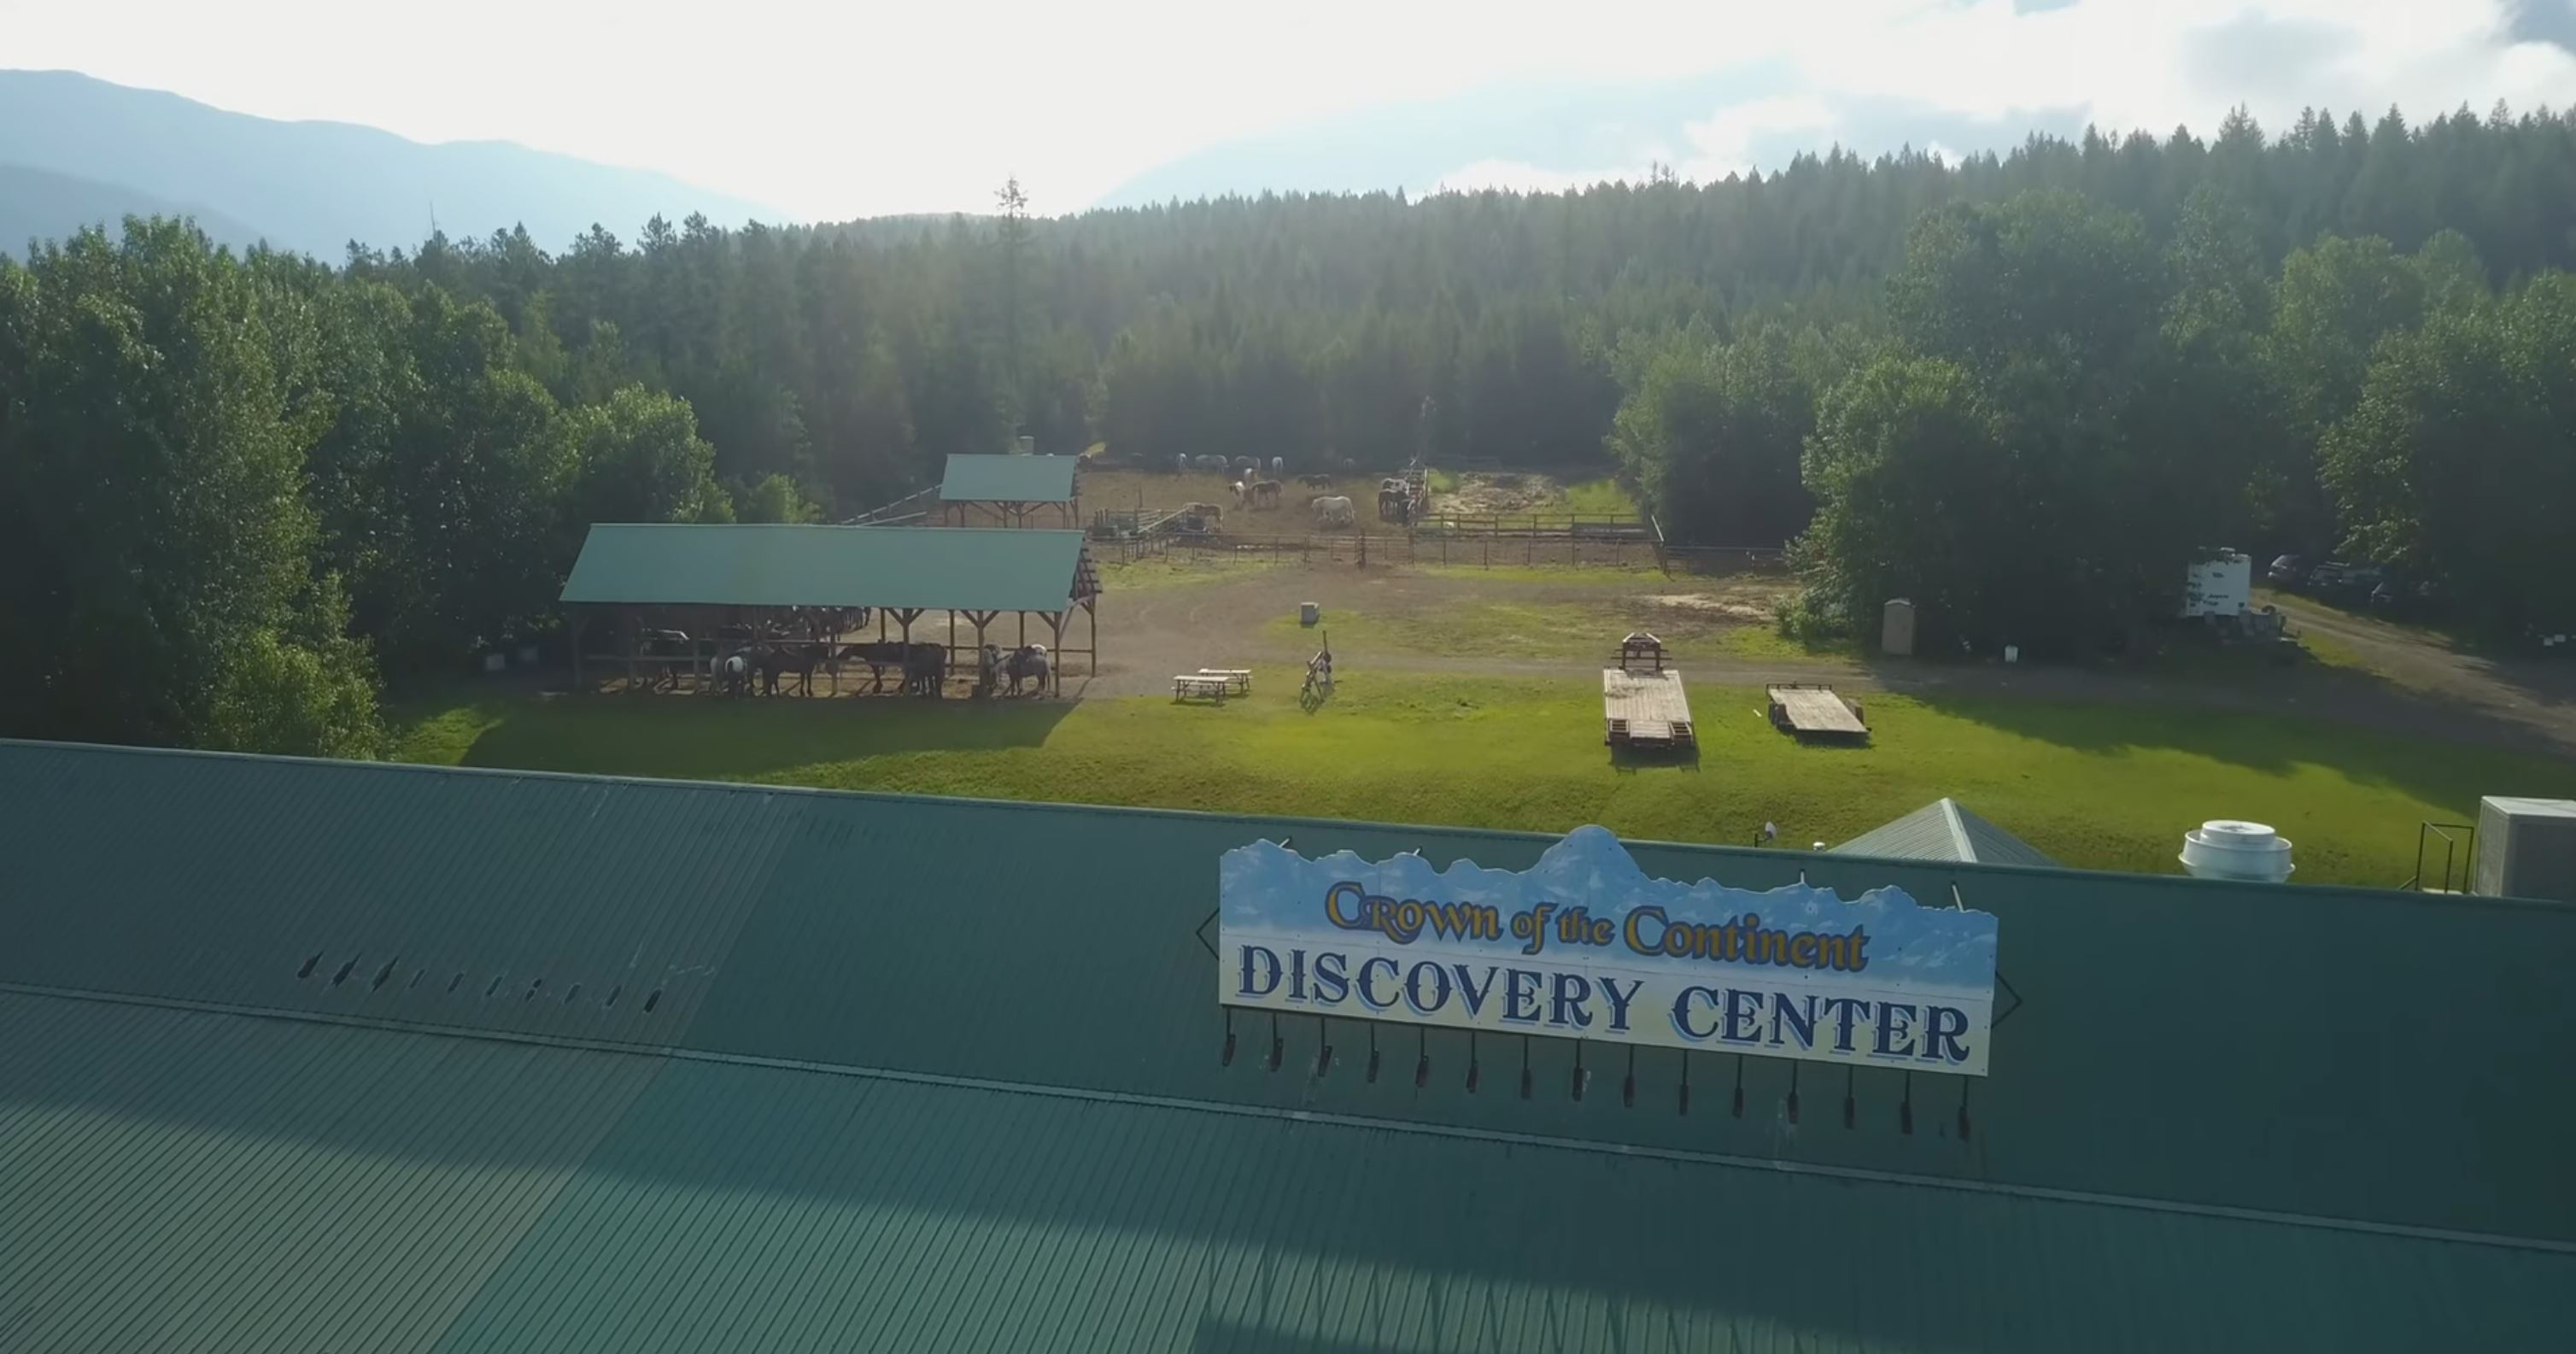 Drone2DiscoveryCenter.JPG